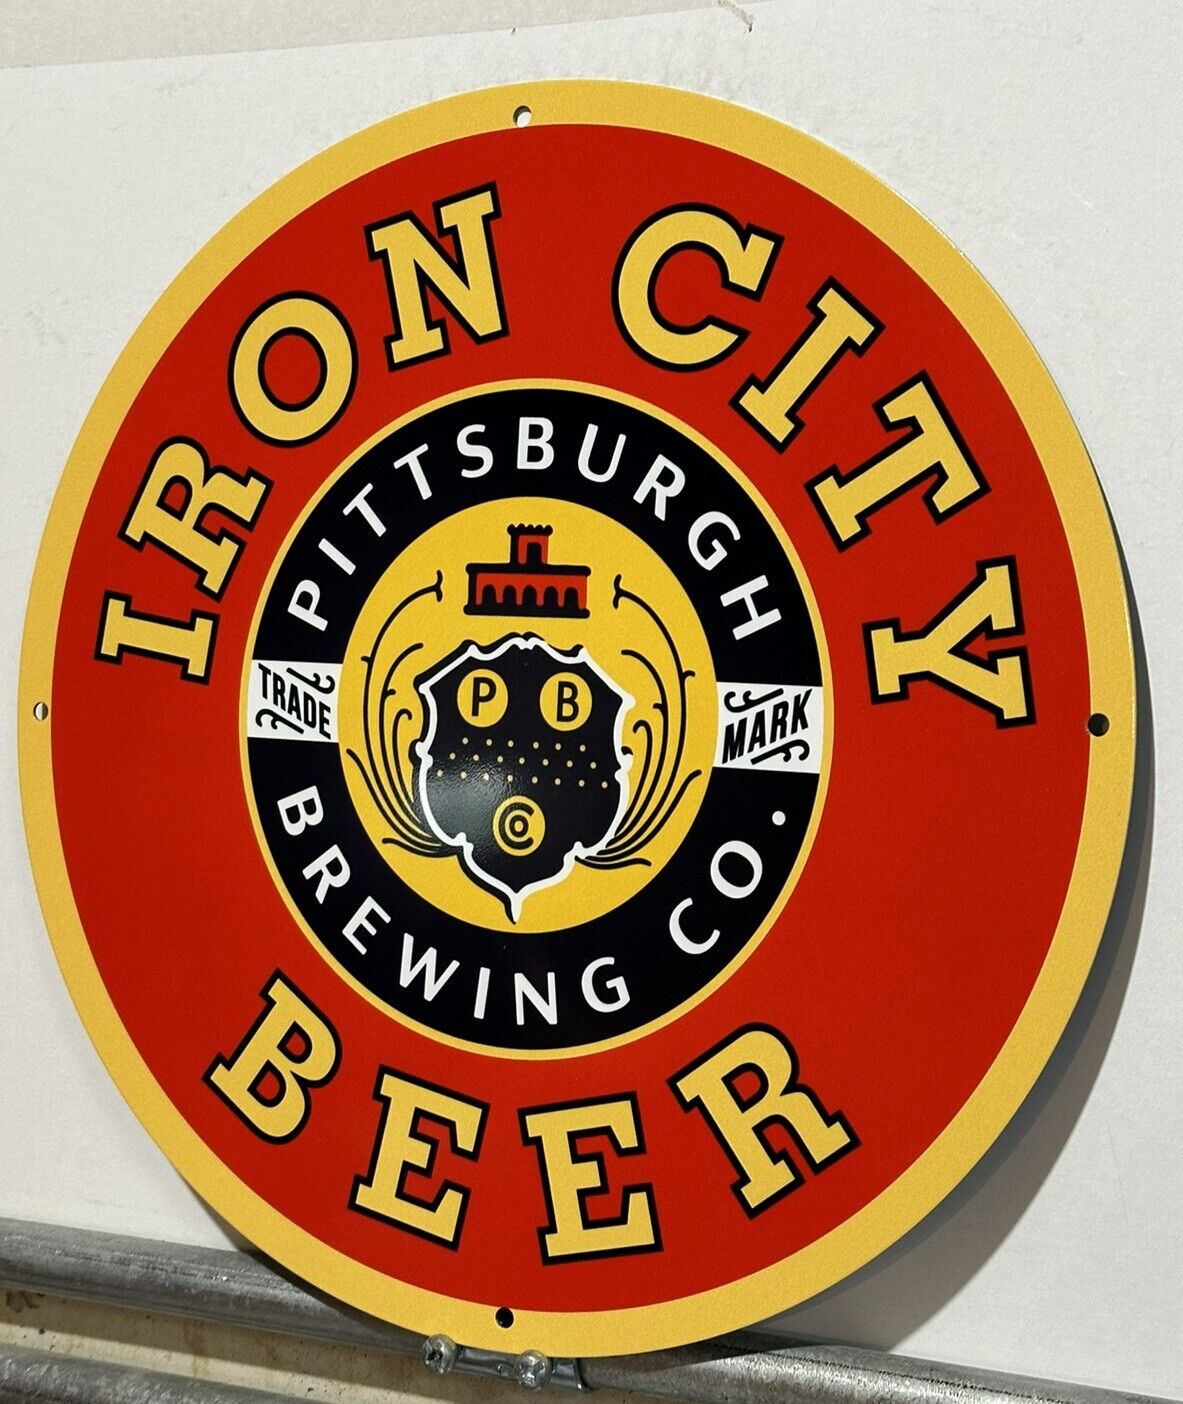 Vintage Style Iron City Beer Heavy Steel Quality Sign